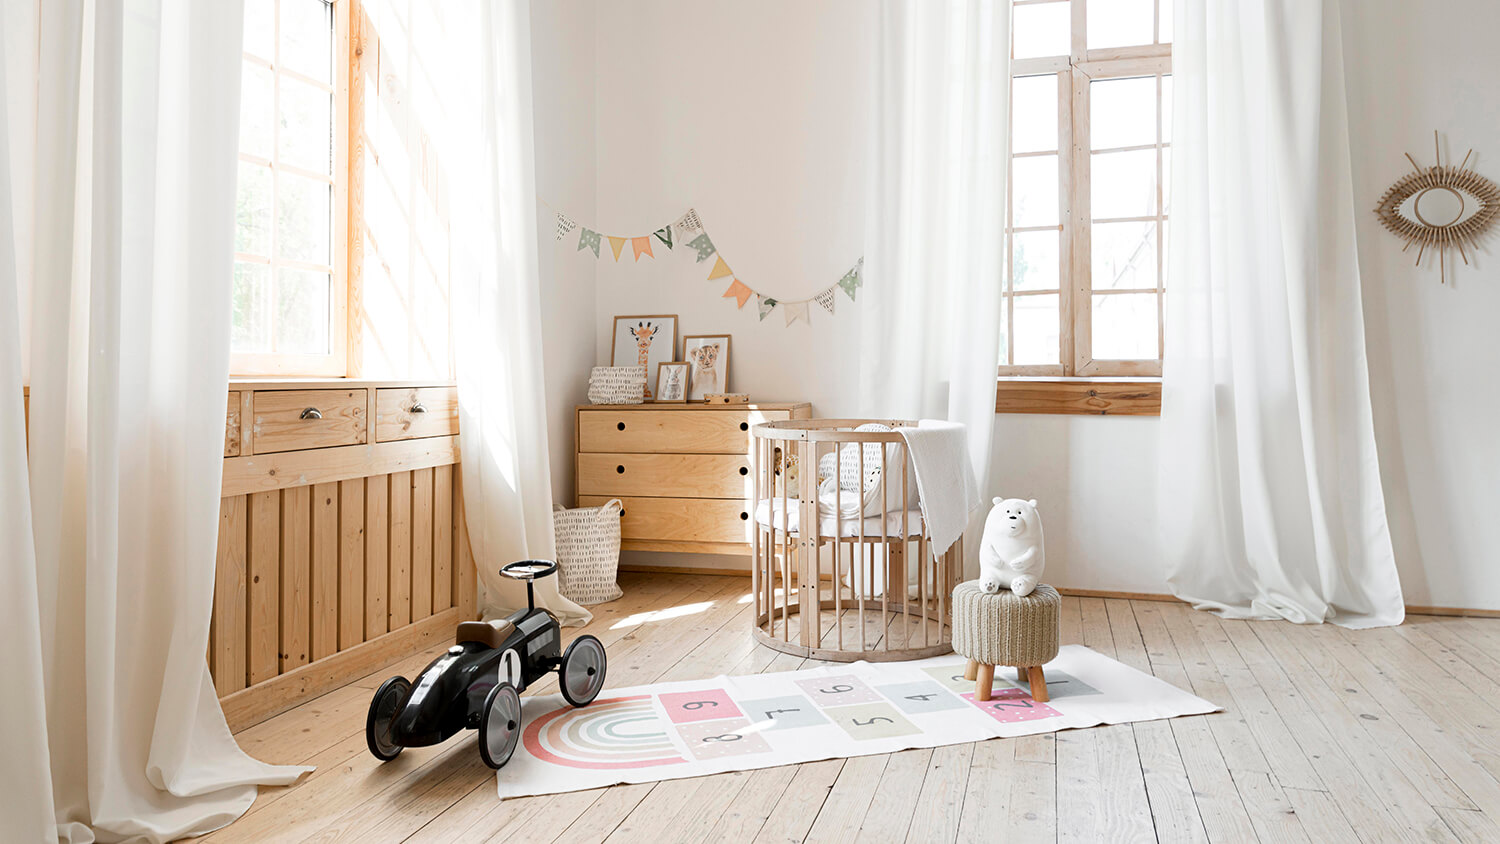 front-view-child-room-with-rustic-interior-design (1)